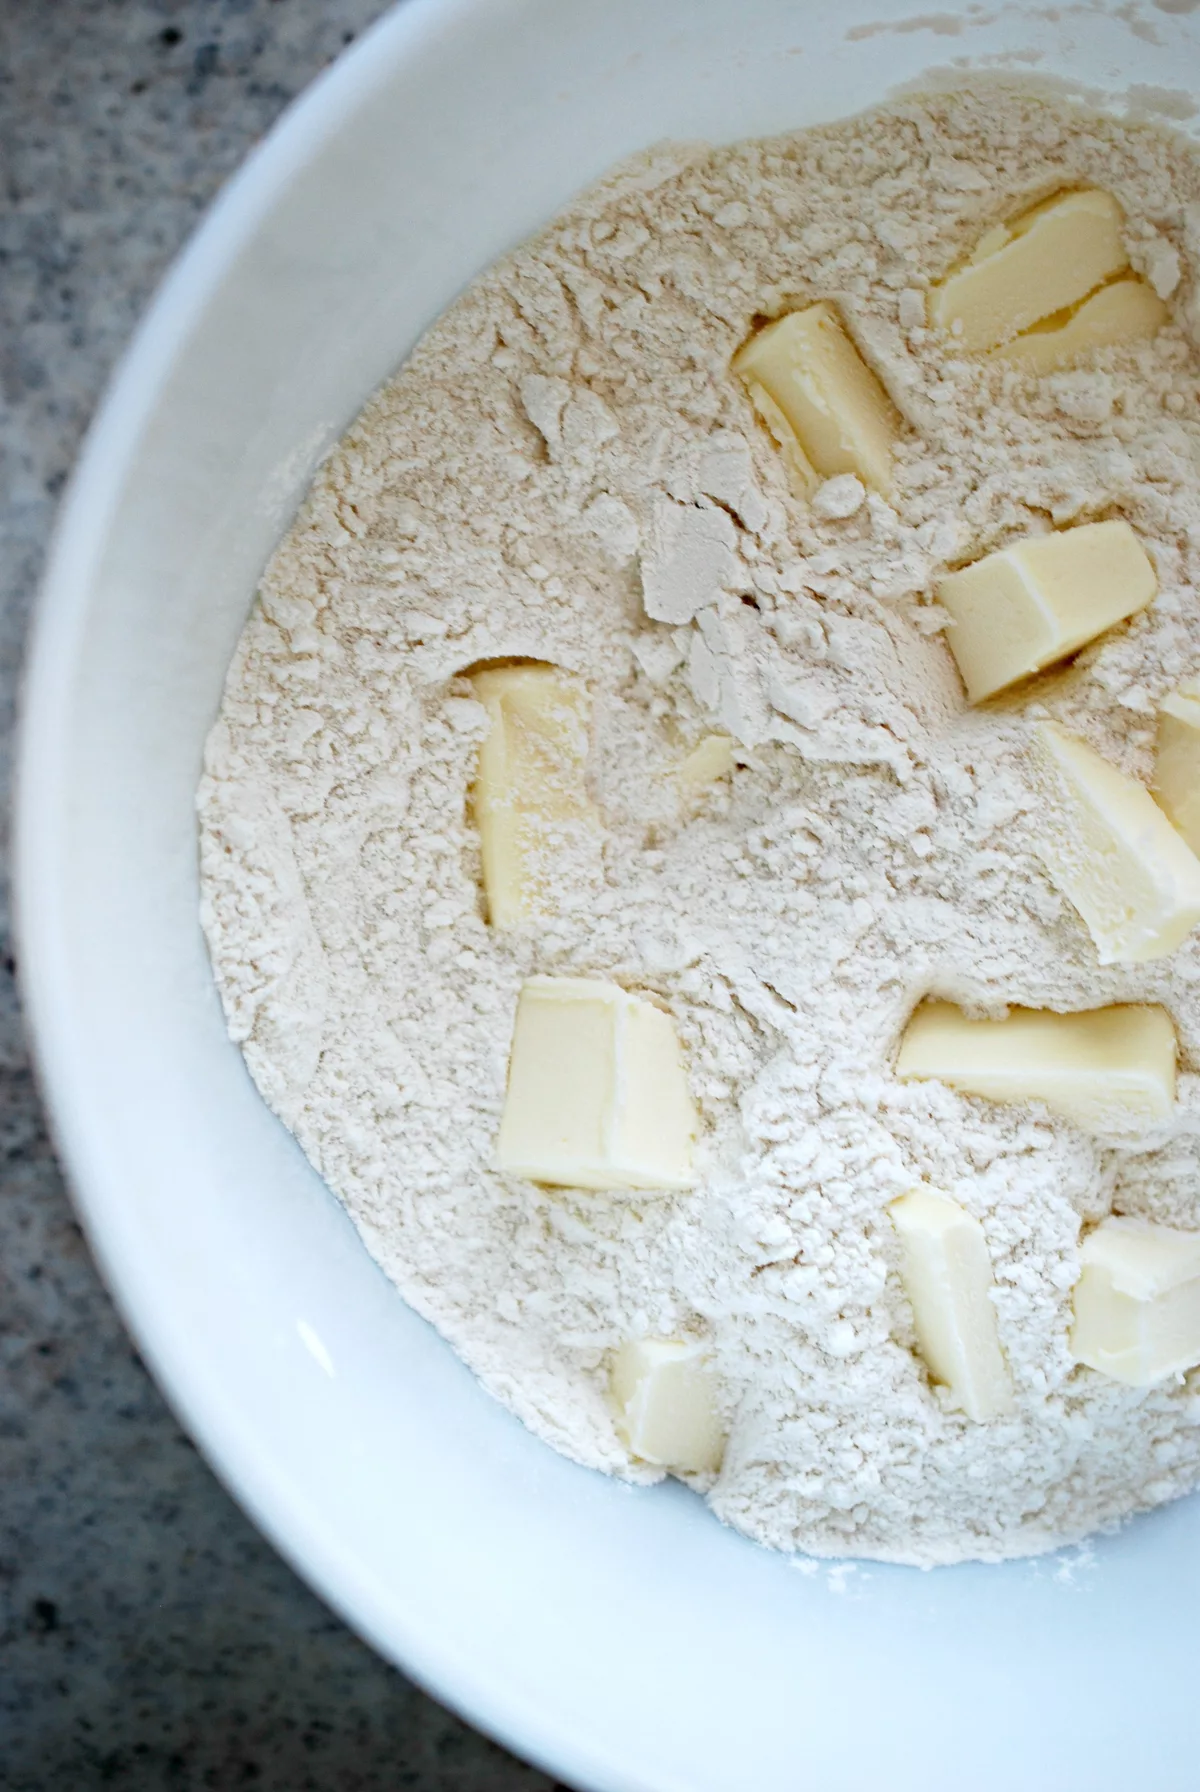 Overhead shot of bowlful of sugar, flour, and baking powder with chunks of butter.